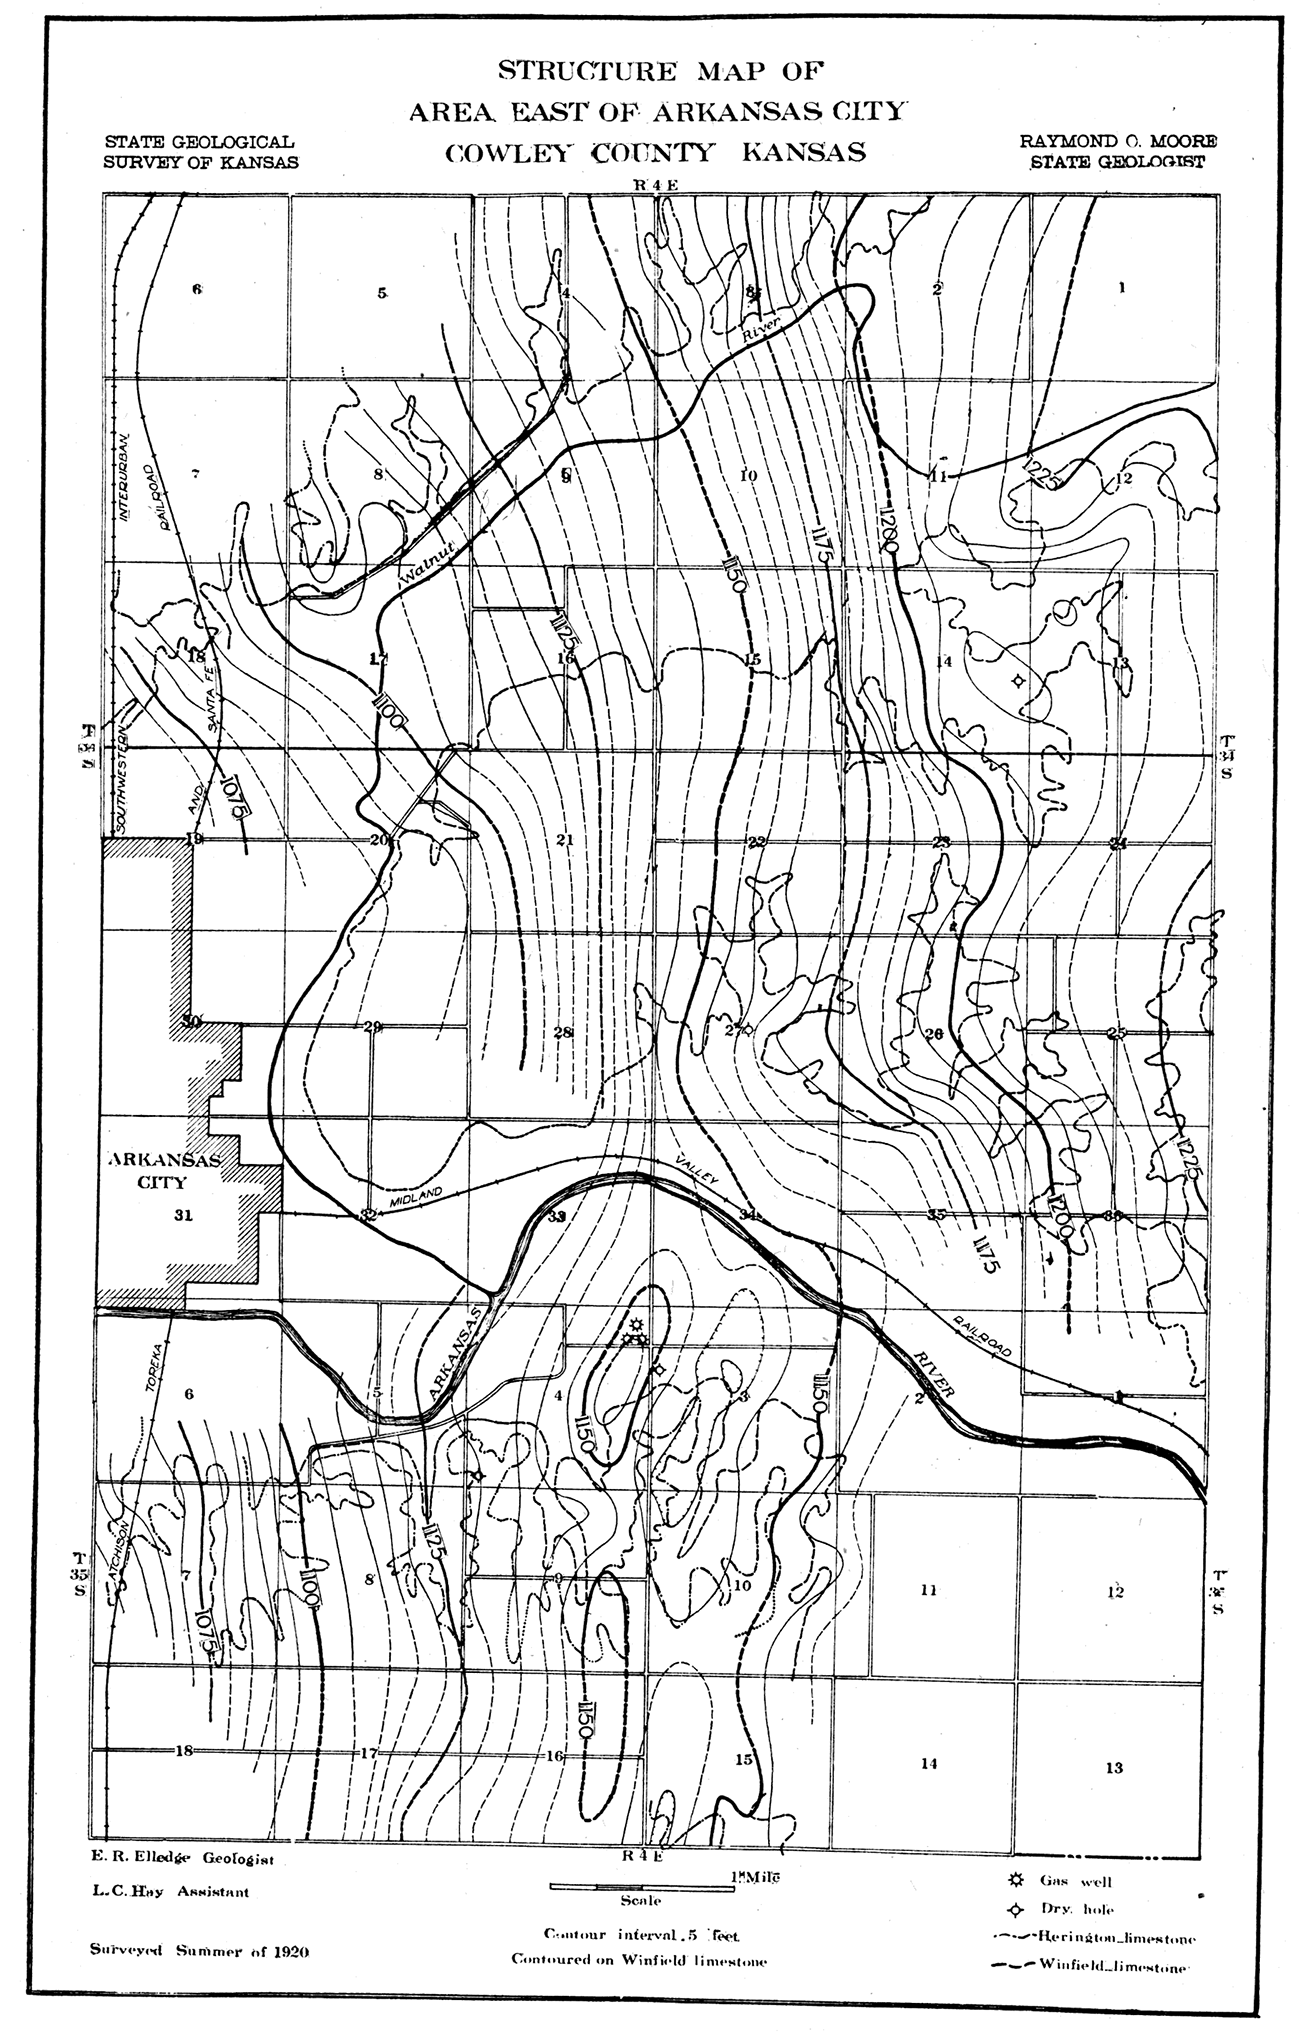 Structure map of area east of Arkansas City, Cowley County, Kansas.